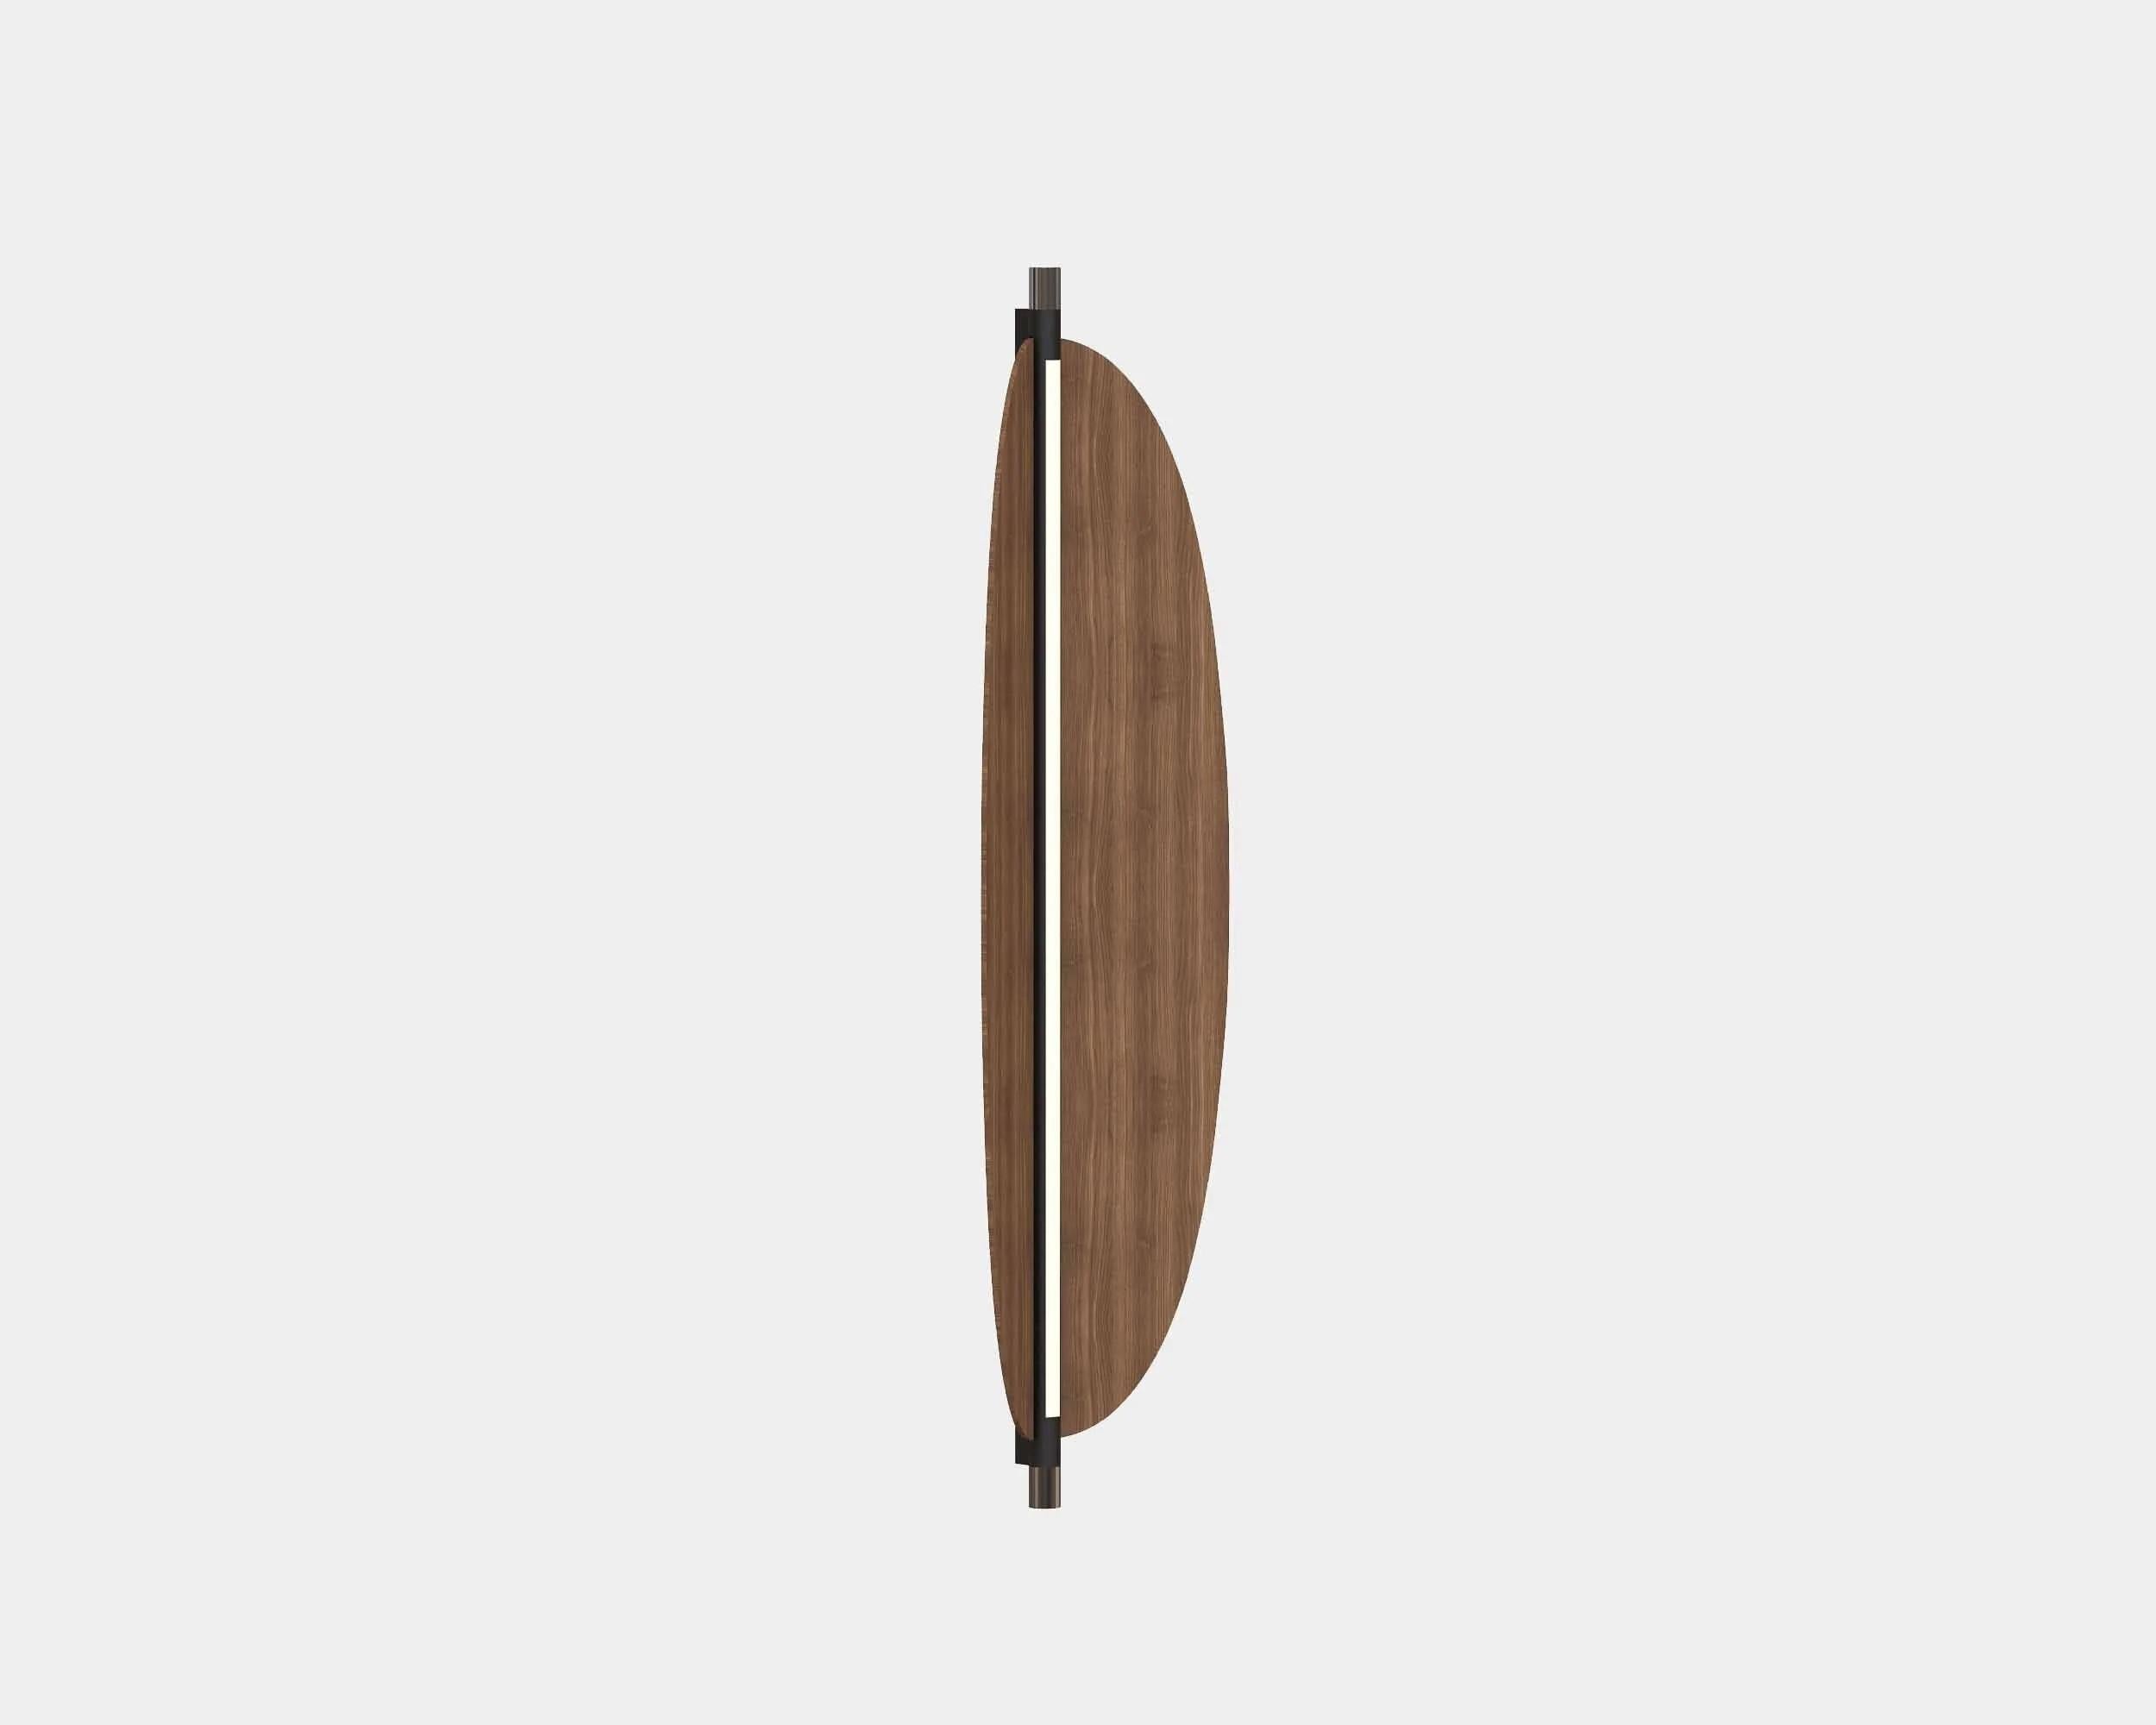 Metal Contemporary Wall Lamp 'Thula 562.43' by Federica Biasi x Tooy, Beige + Oak For Sale